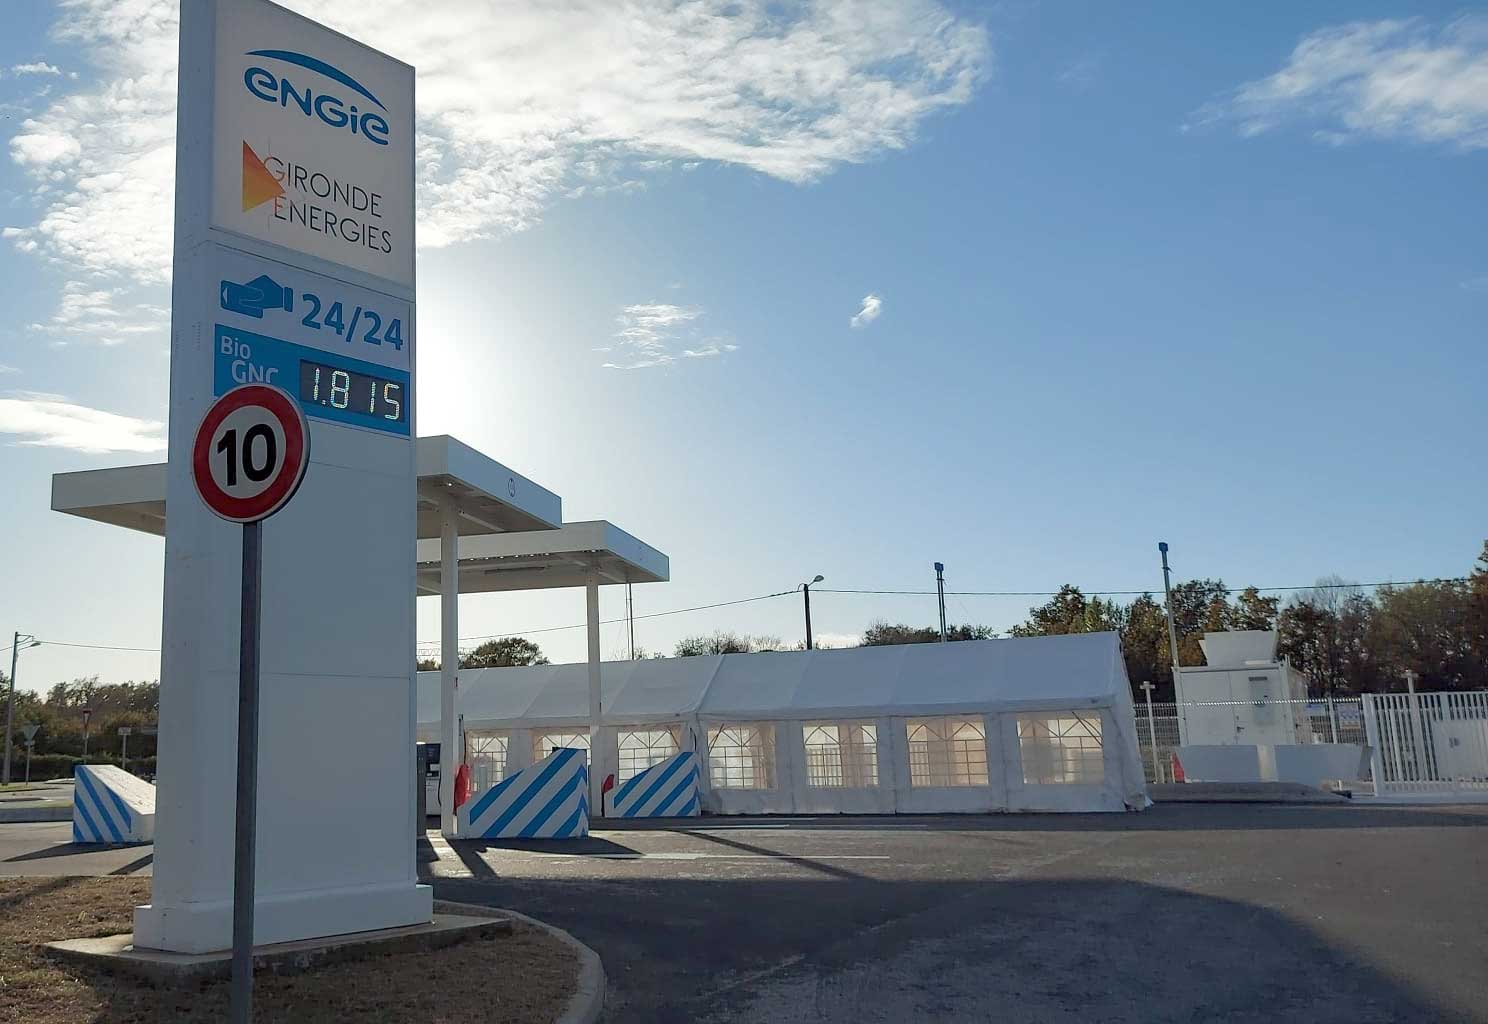 ENGIE Solutions et Gironde Energies inaugurent une nouvelle station GNC